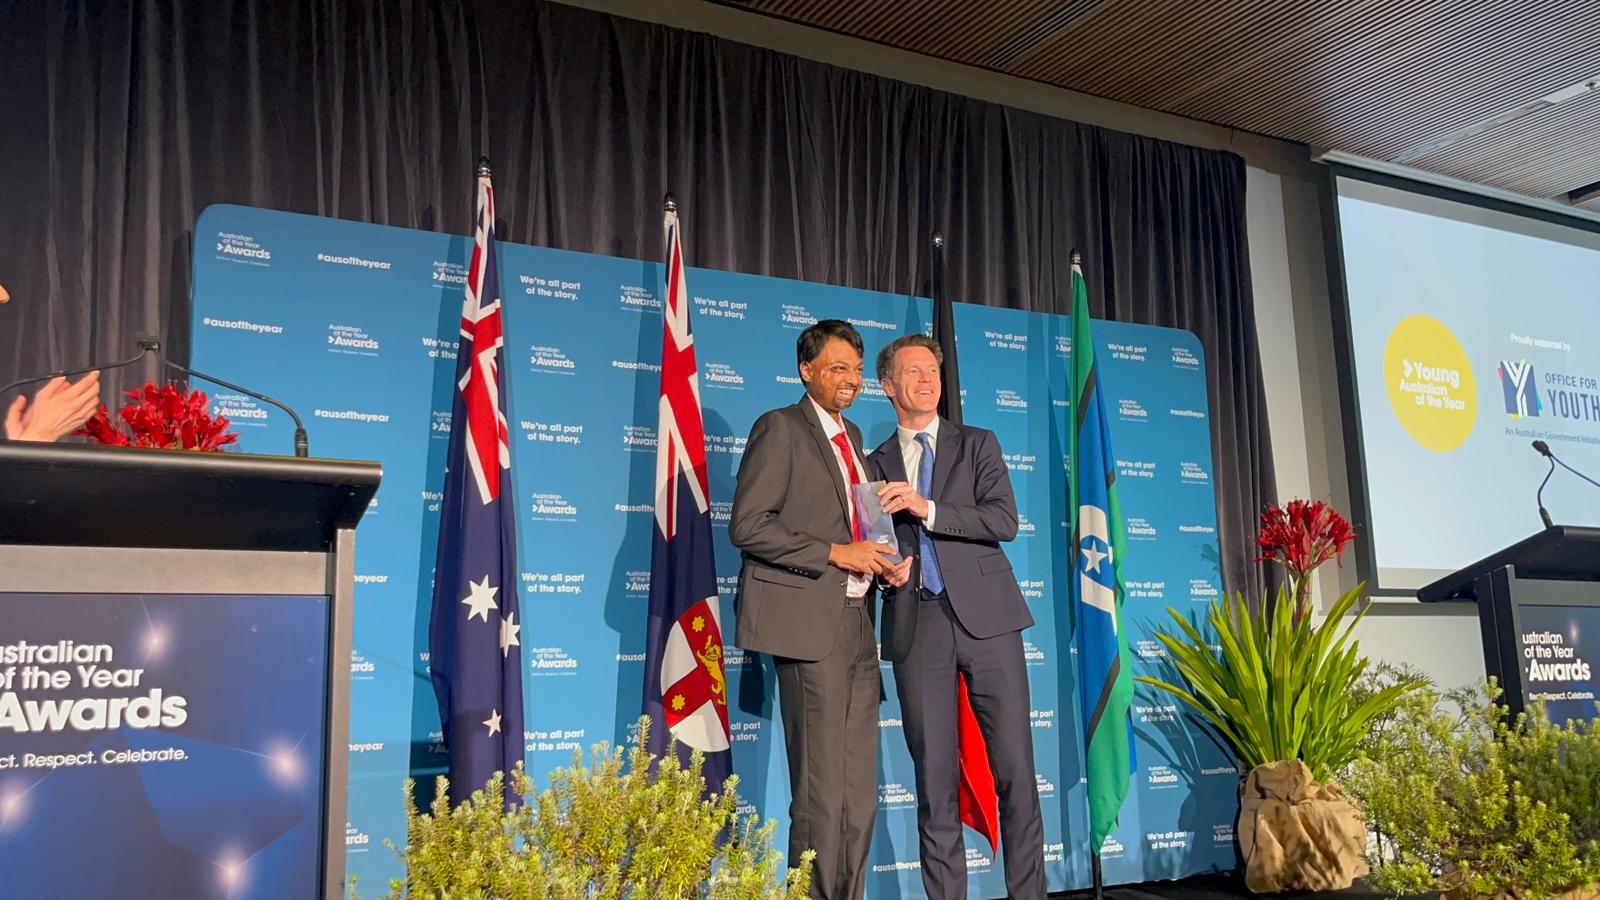 Nikhil Autar Young Australian of the Year